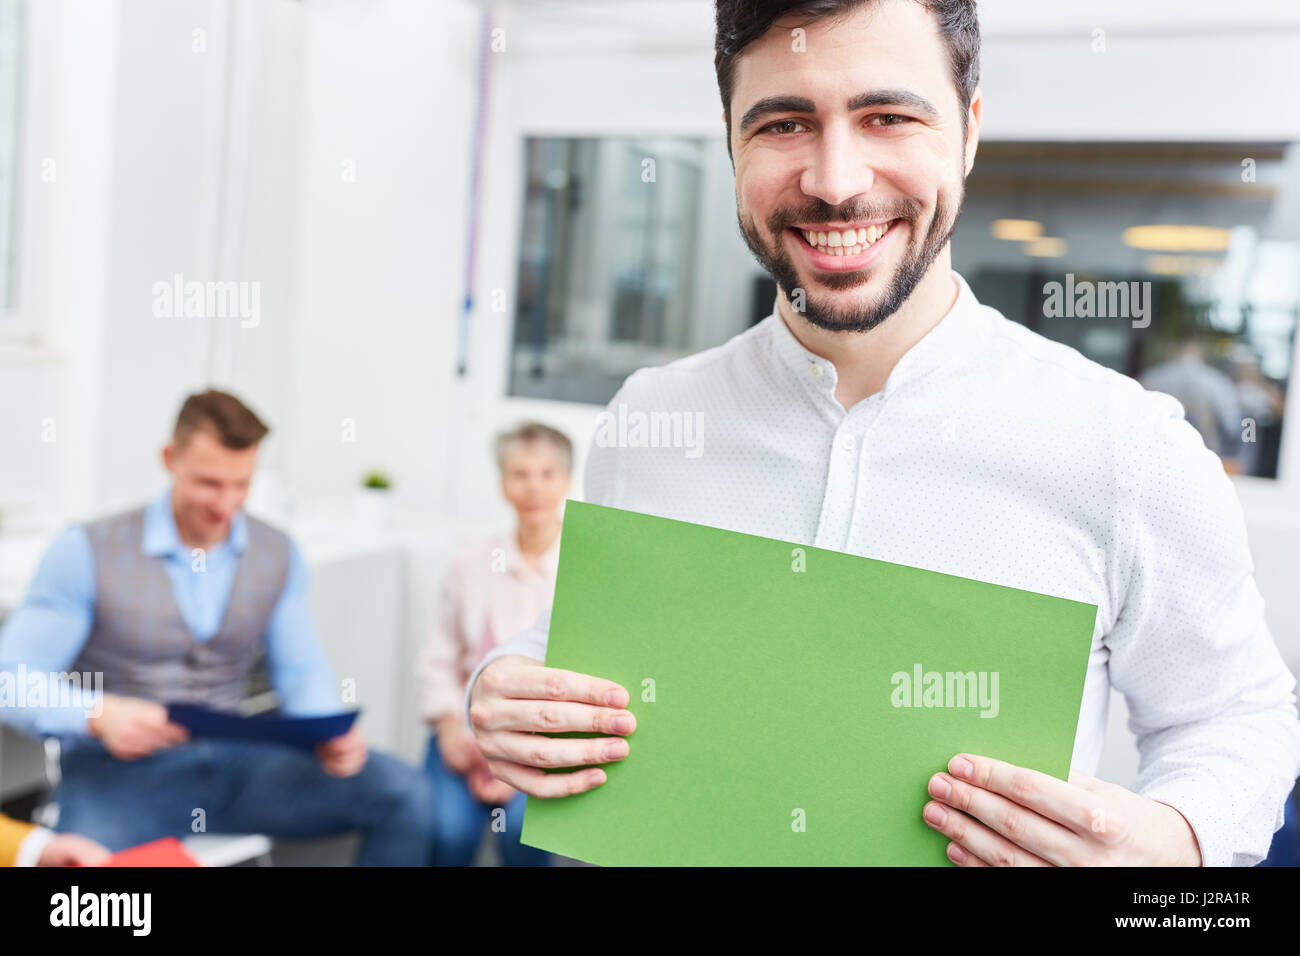 Young man holding blank sign in brainstorming workshop for creative ideas Stock Photo